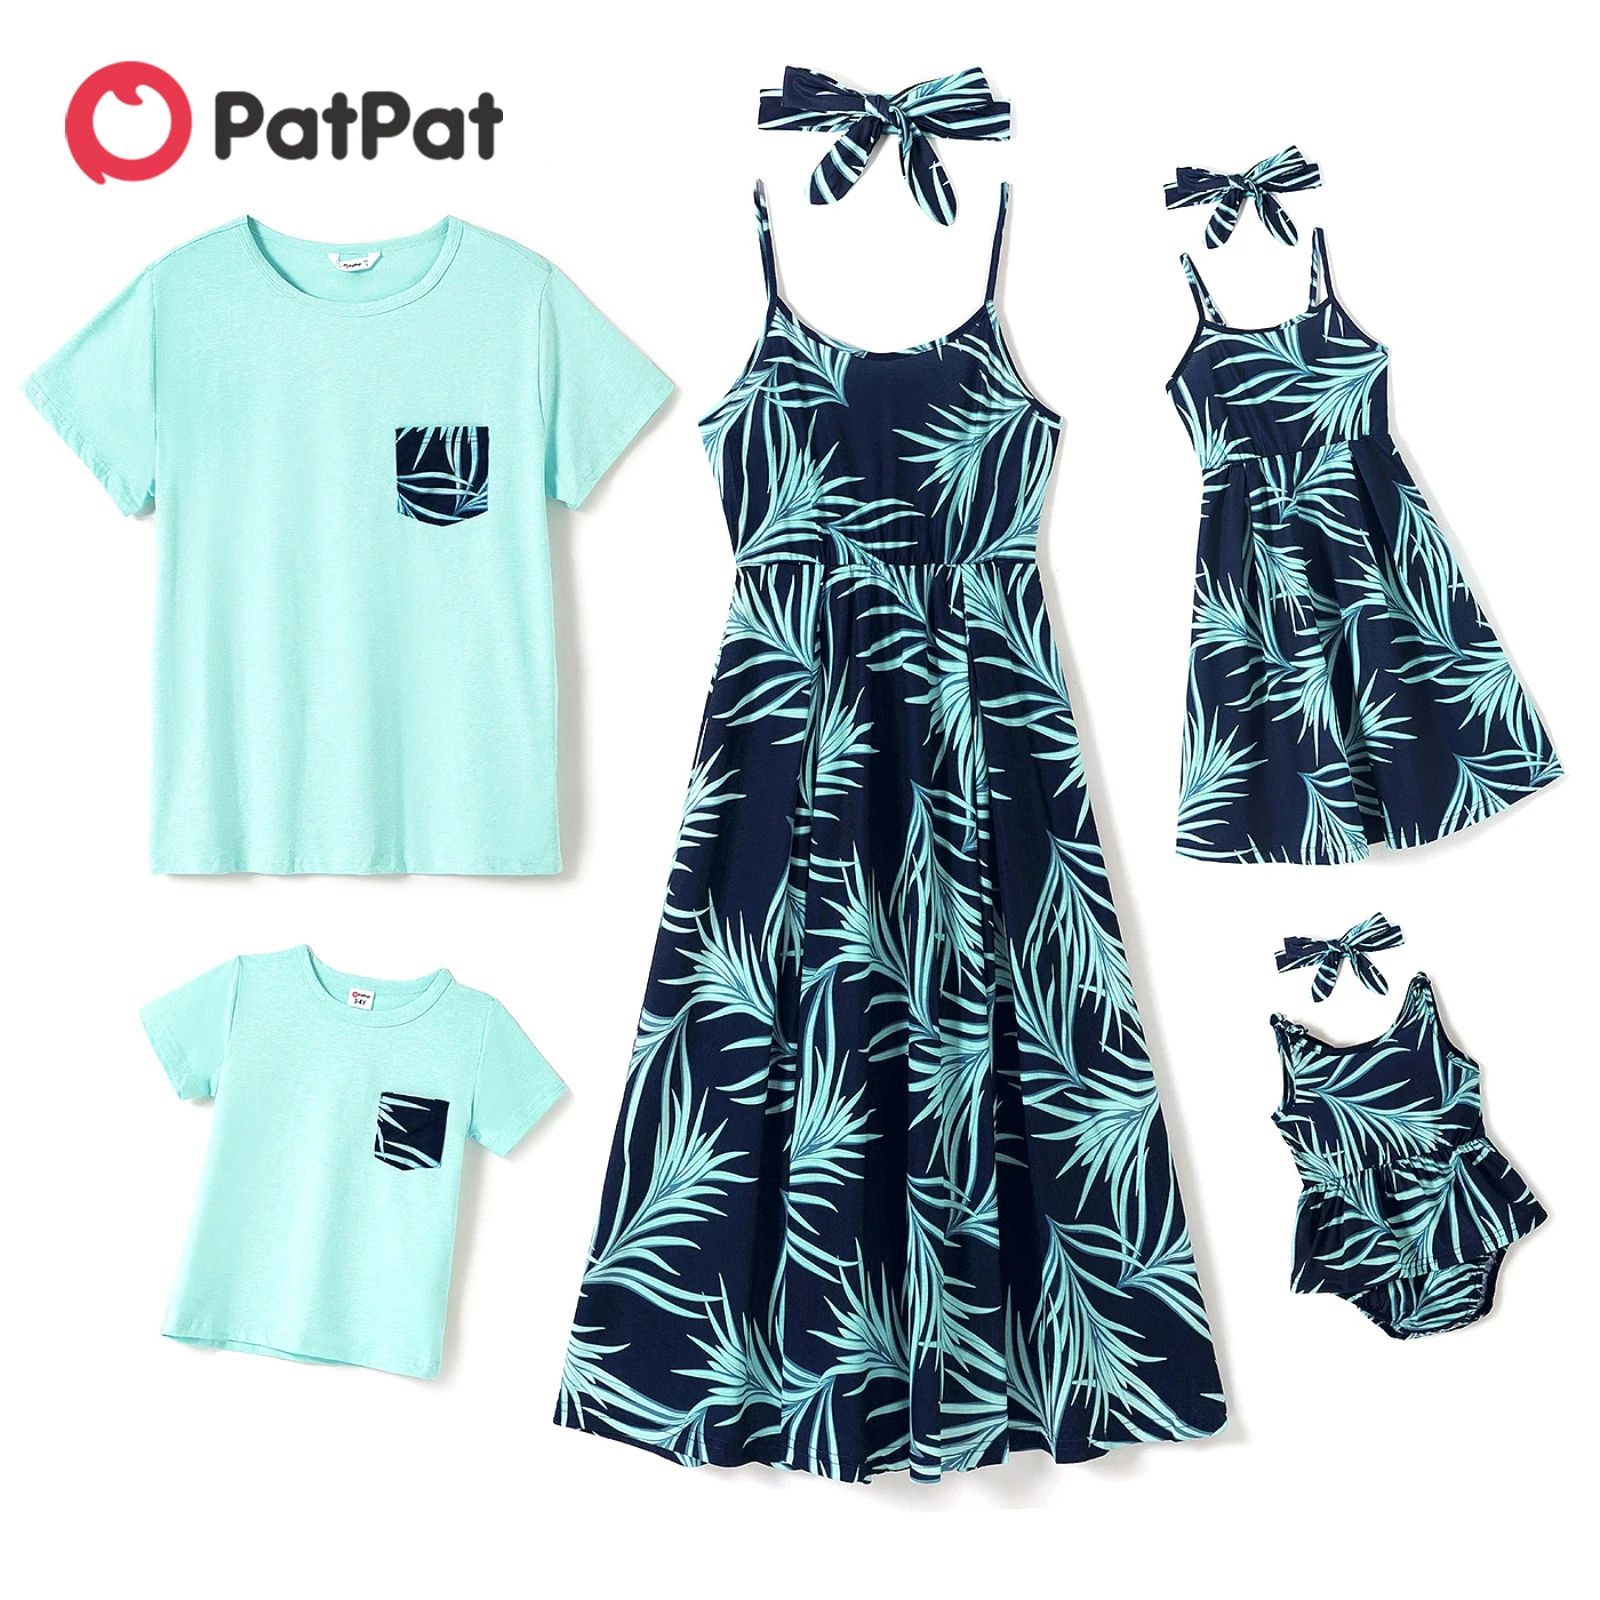 PatPat 2021 New Arrival Summer Mosaic Family Matching Palm Leaf Tank Dresses - Solid T-shirts - Rompers Family Look Short Sets